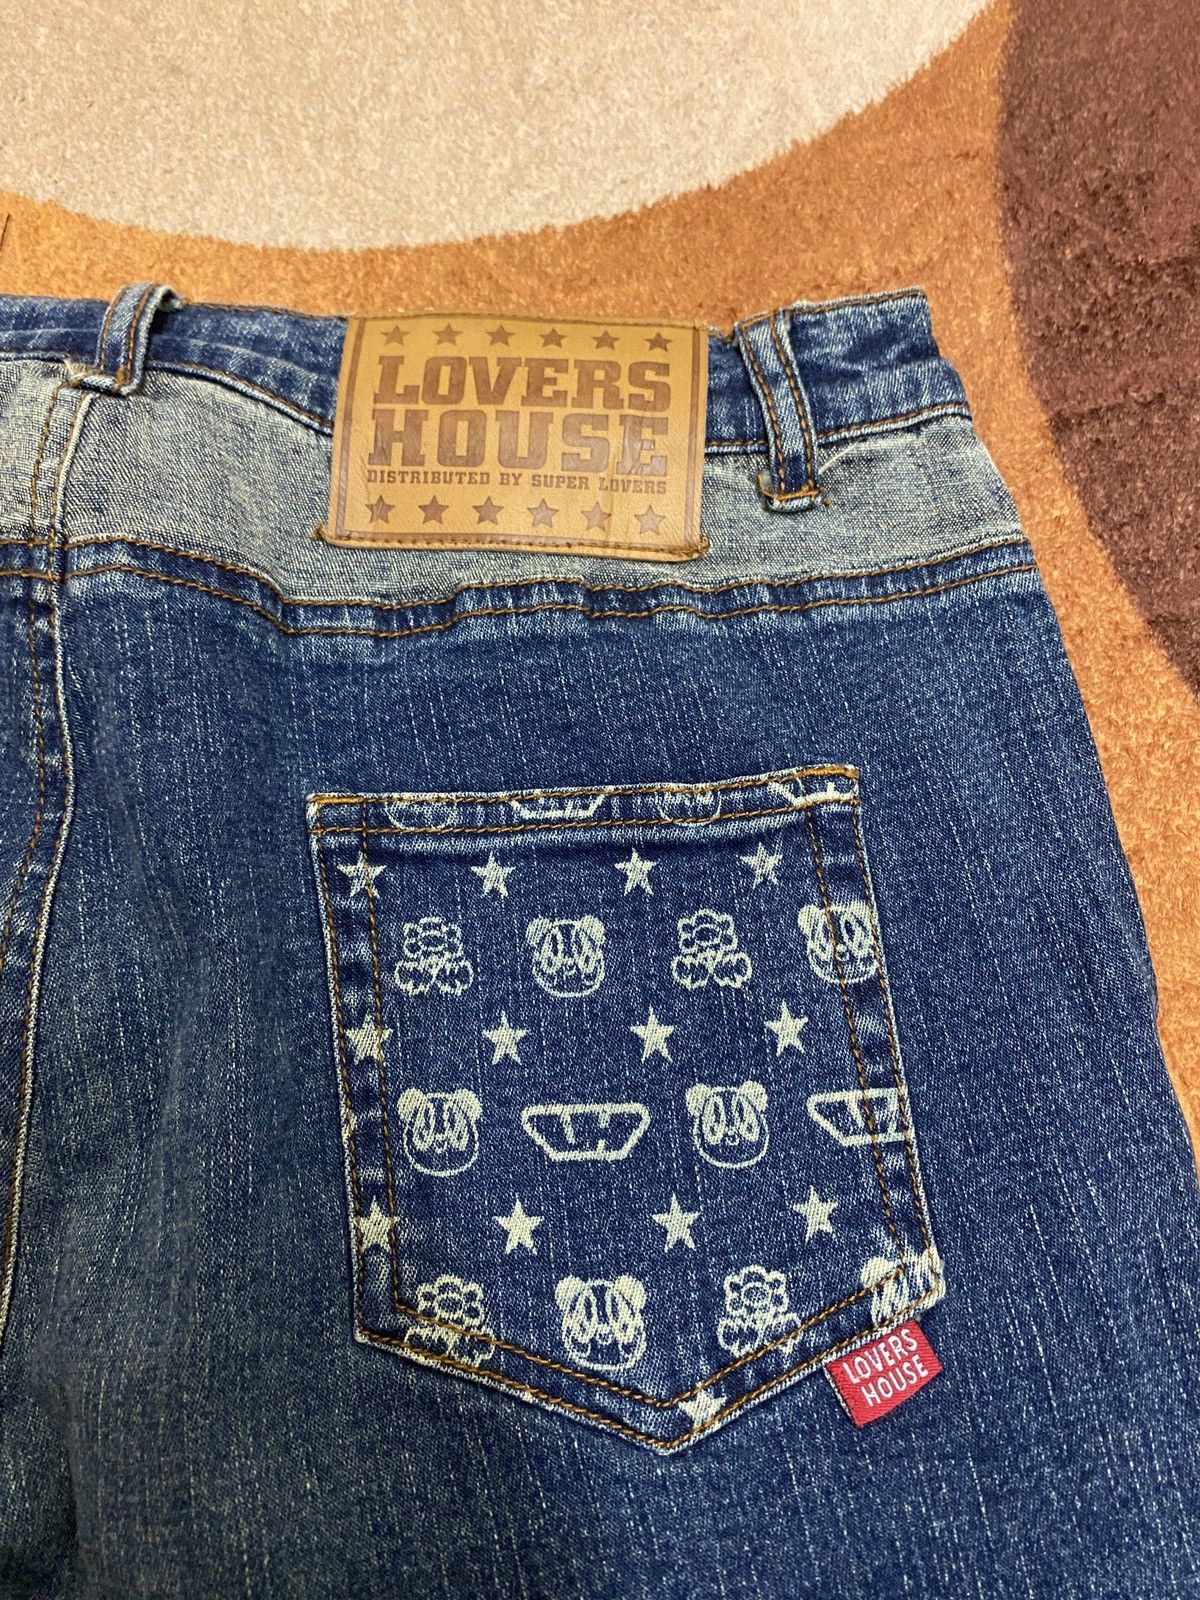 Japanese Brand - Super Lovers / Lovers House Bootcut Jeans - 6